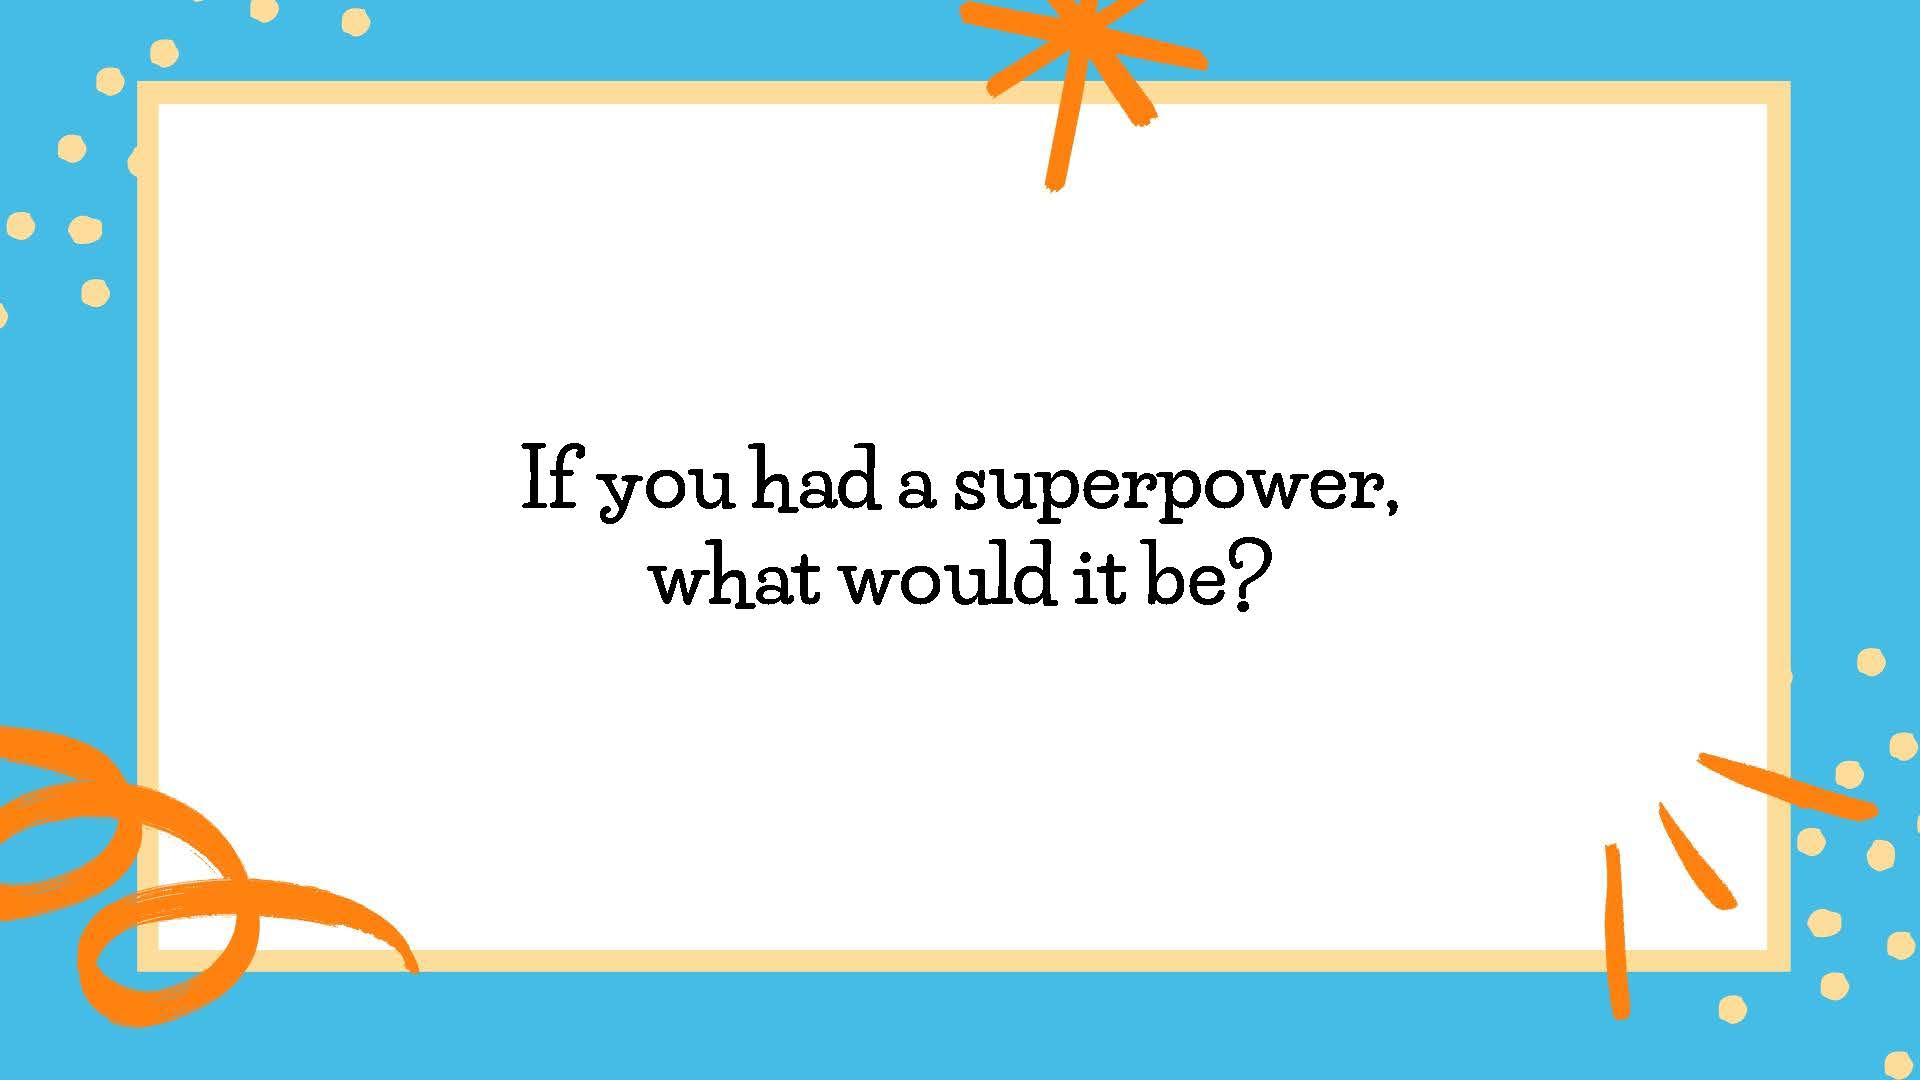 If you had a superpower, what would it be?